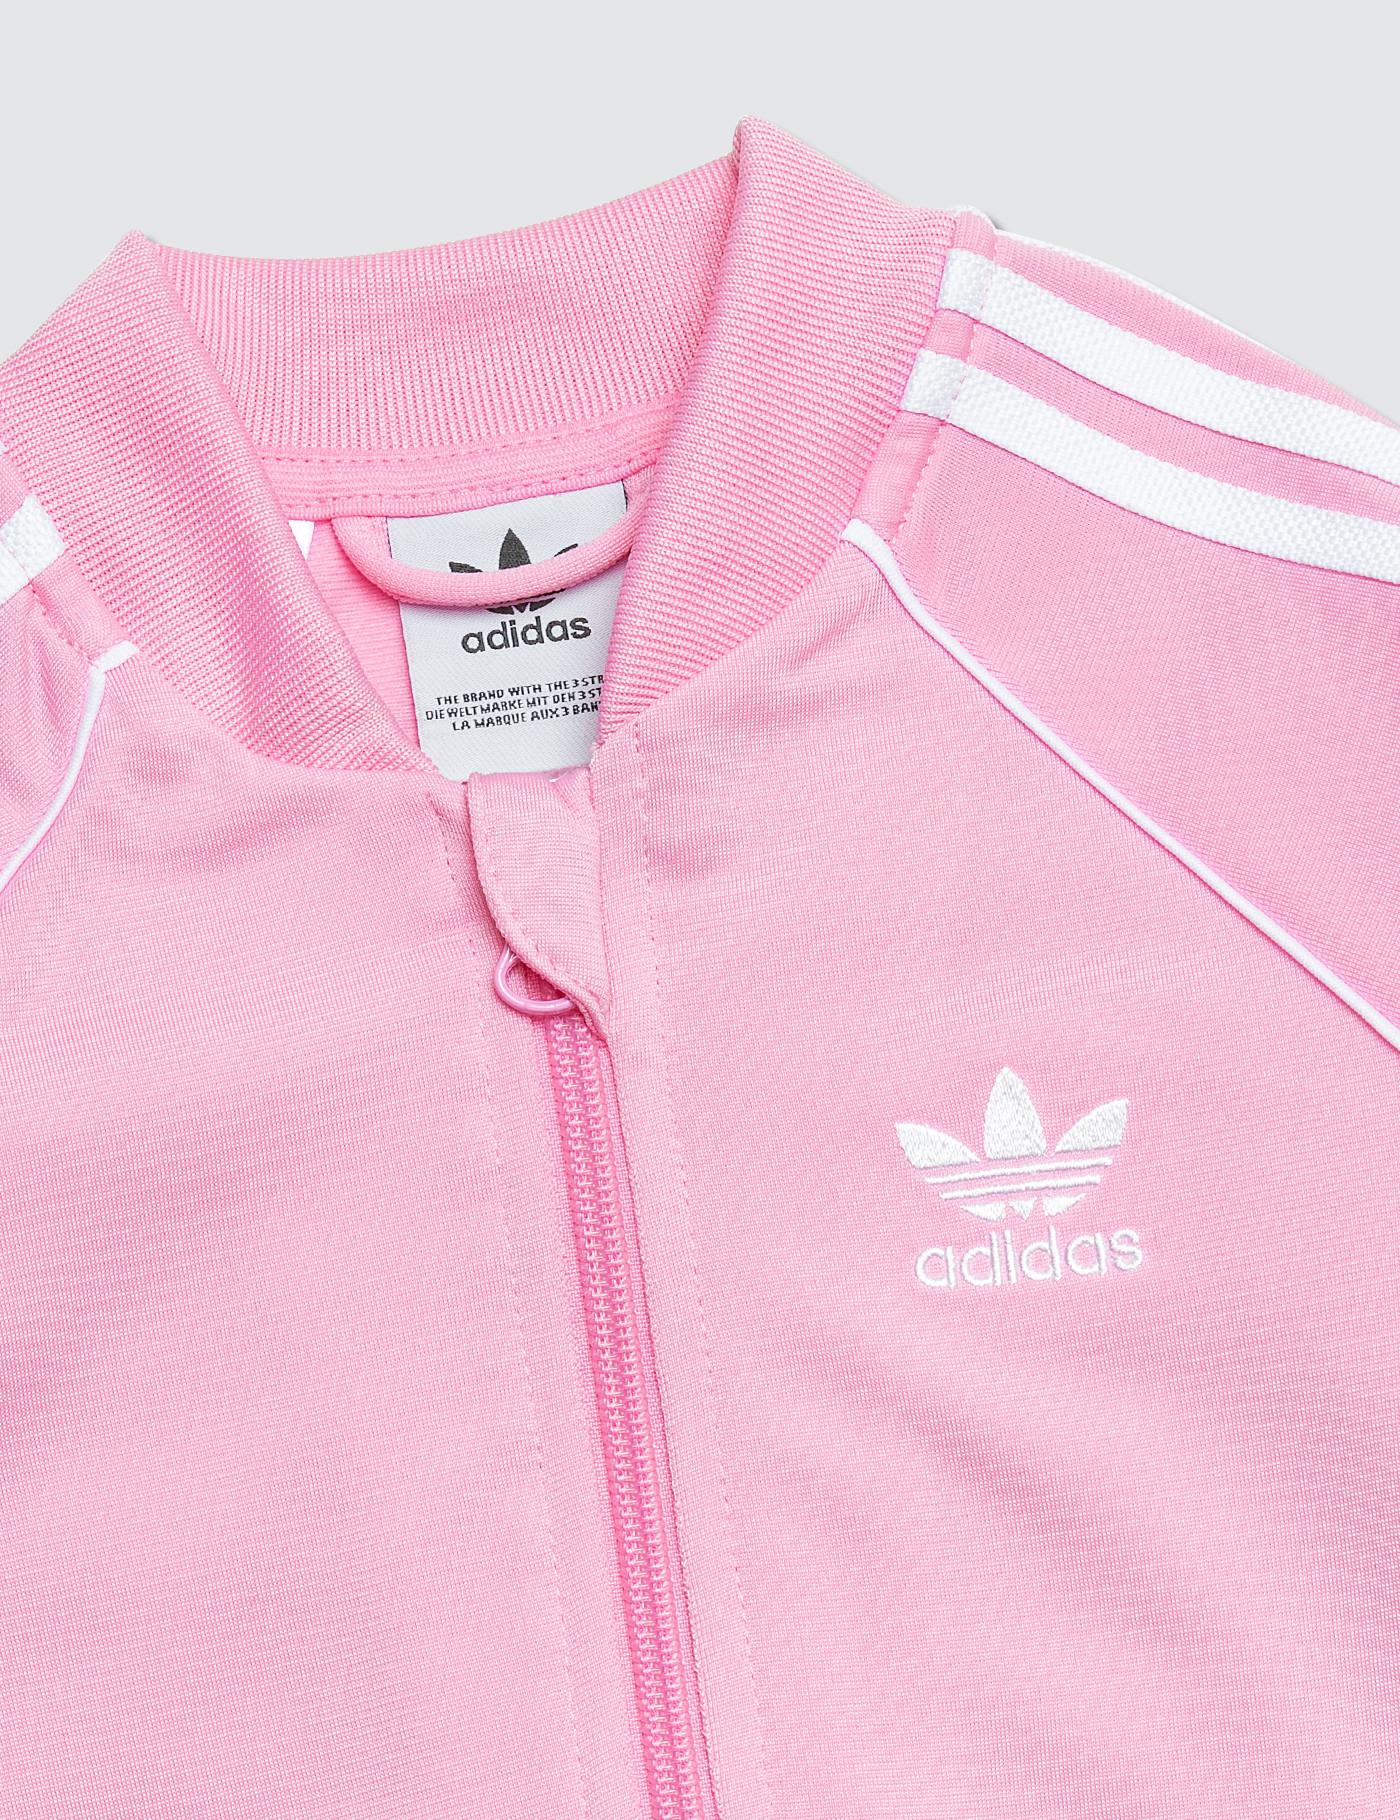 adidas Originals Synthetic Superstar Track Suit in Pink for Men - Lyst